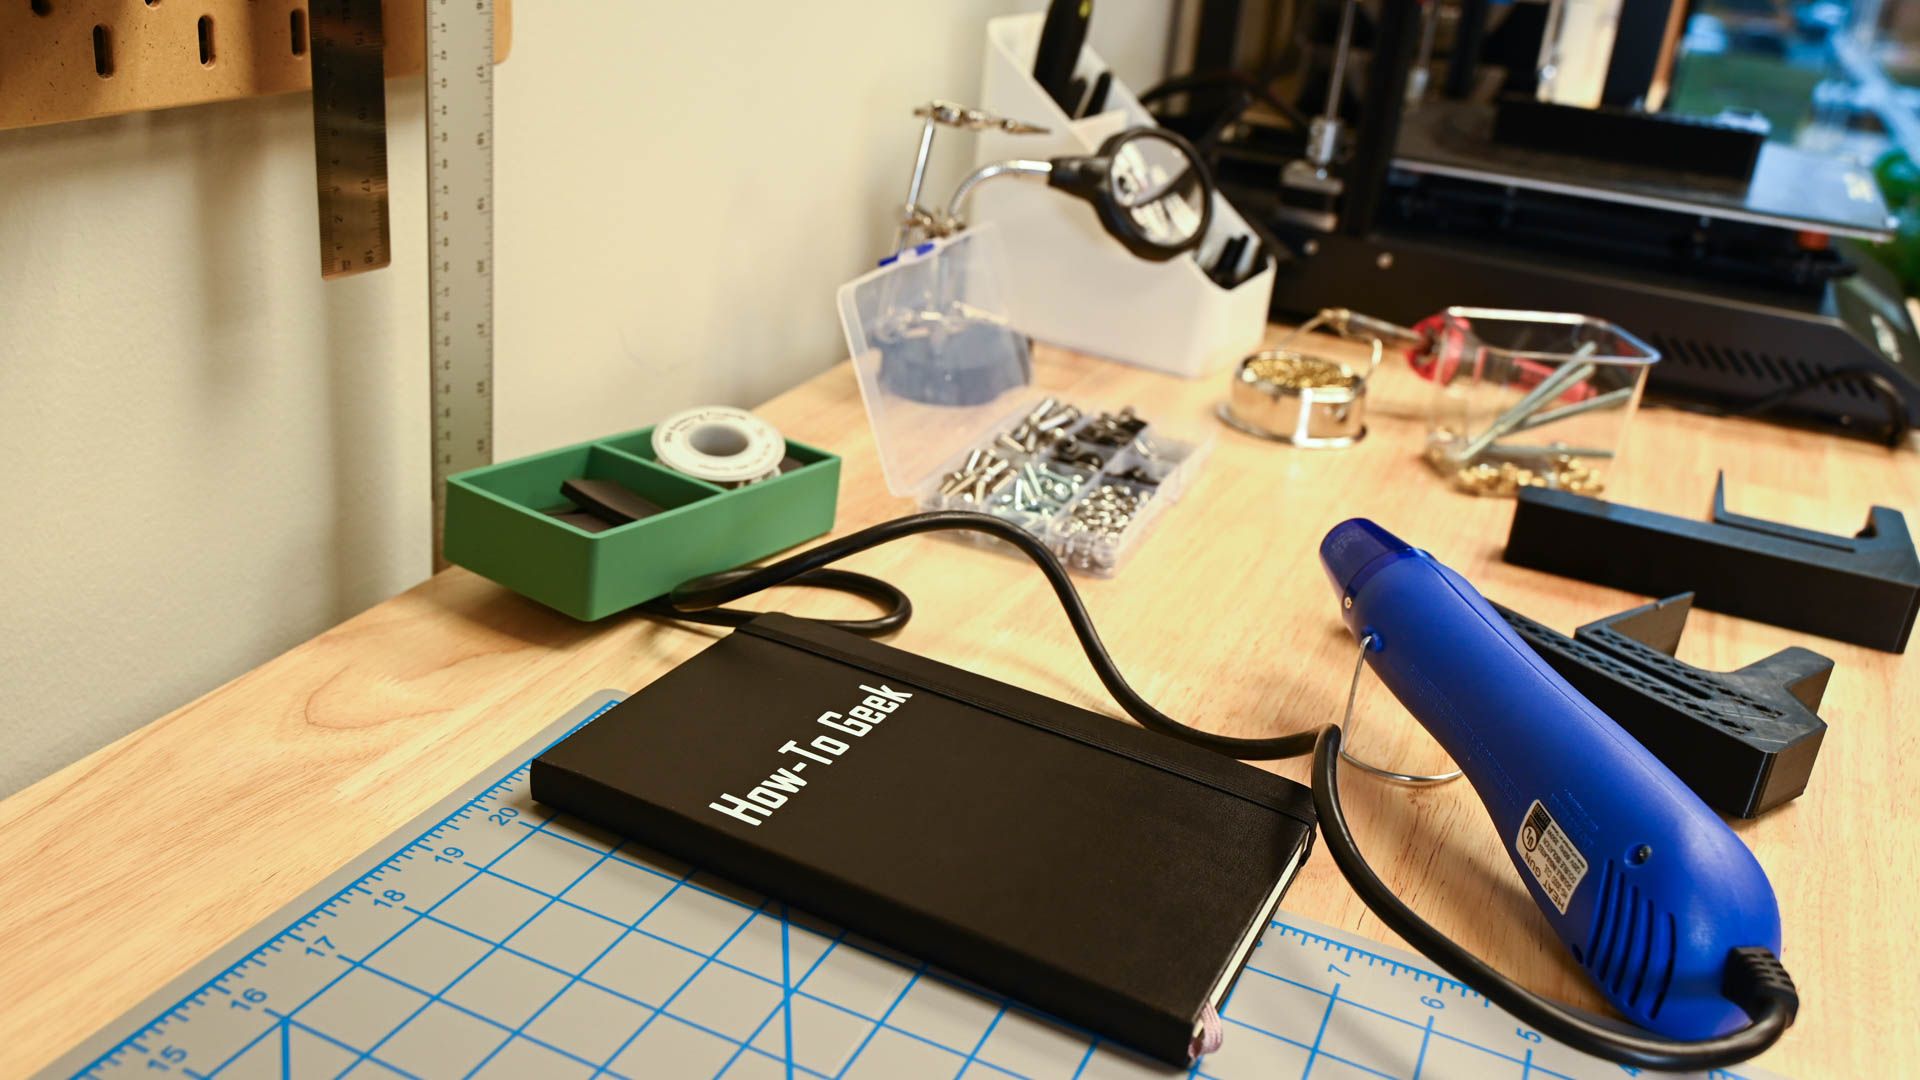 A How To Geek Notebook on a workbench with tools